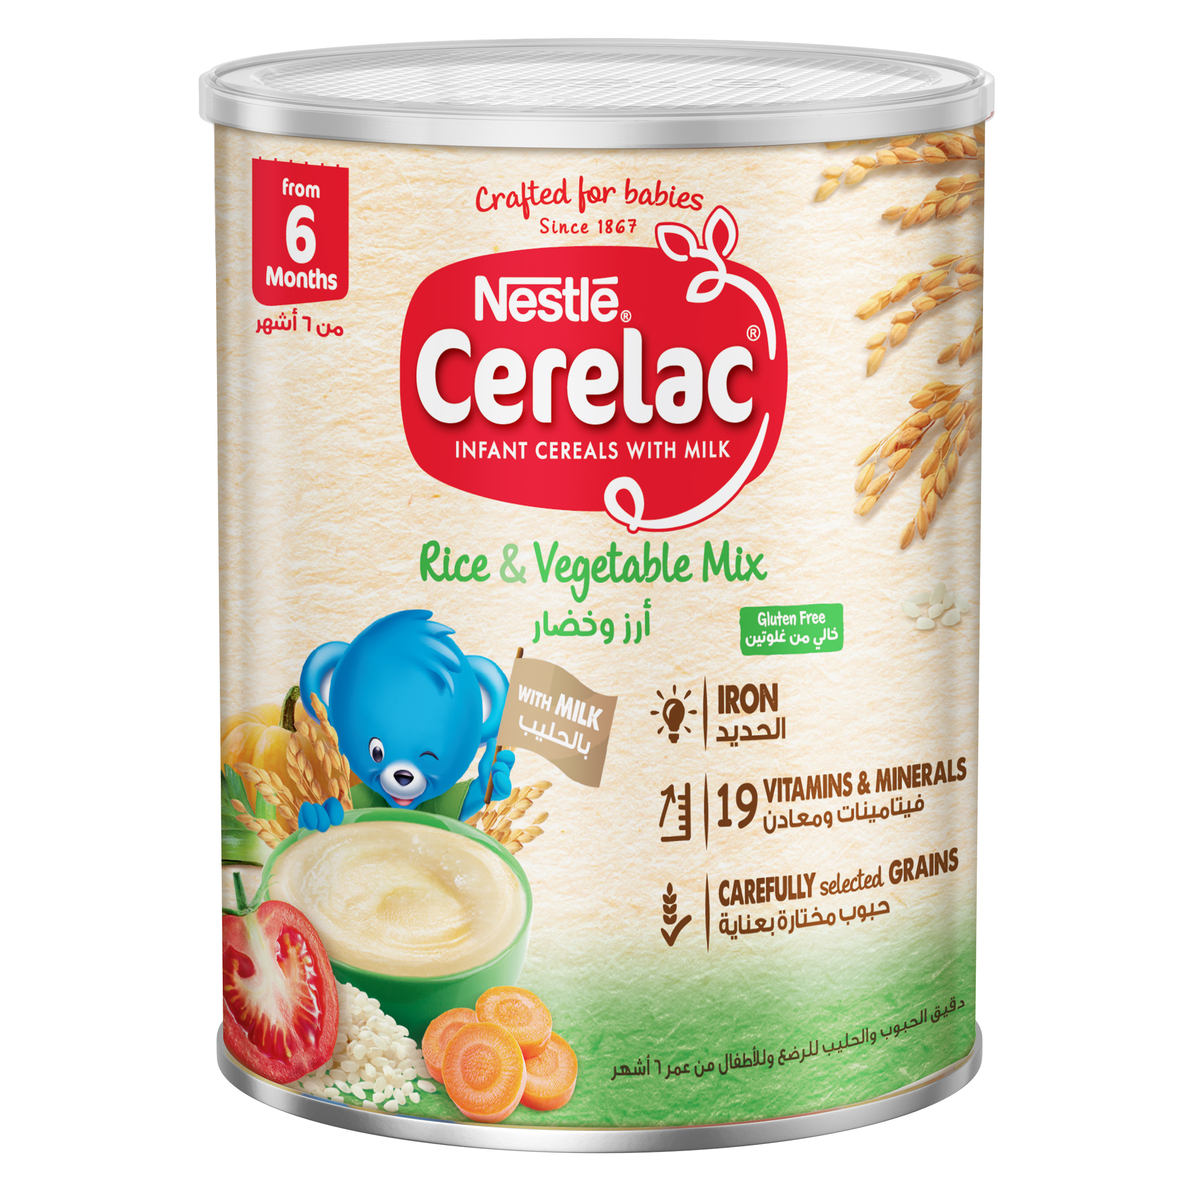 Nestle Cerelac Rice & Vegetable Mix Infant Cereal From 6 Months 350 g